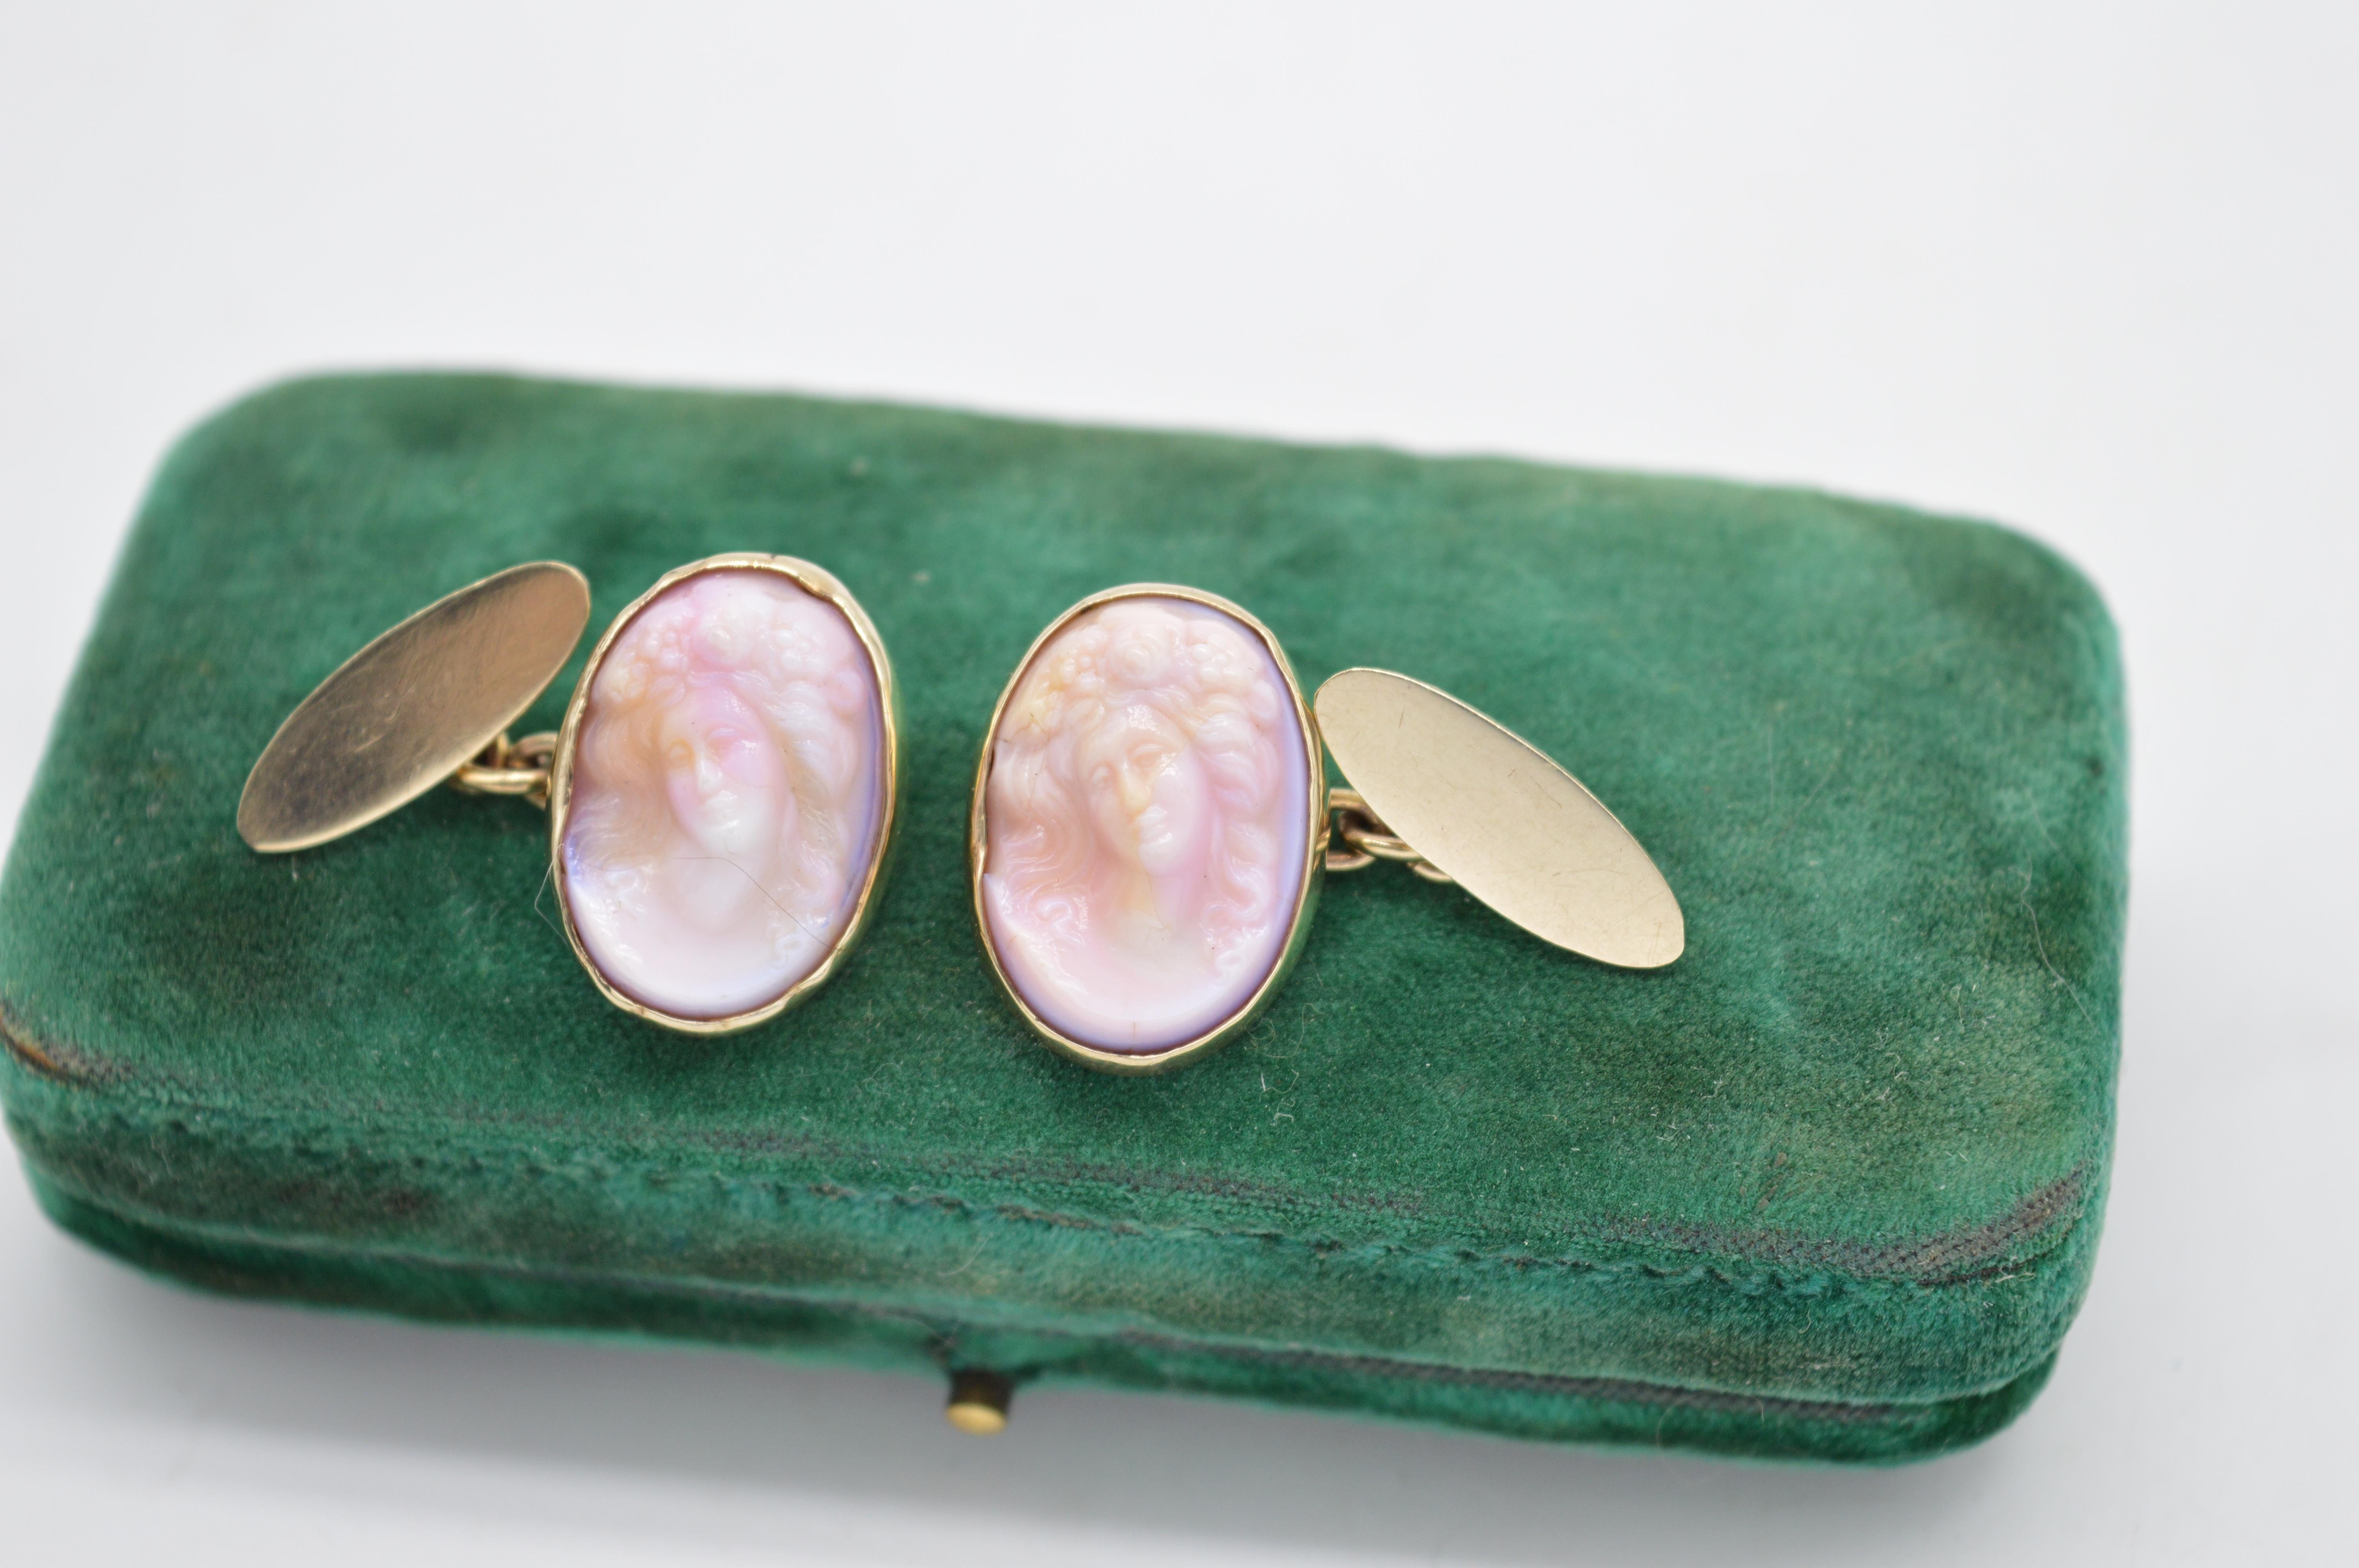 This antique pair of 9ct gold cufflinks features a perfectly carved cameo of the Greek goddess Aphrodite.

The cameos are perfectly matched both in carving and colour, clearly displaying the craftsman's immense skill.

Likely Victorian, these